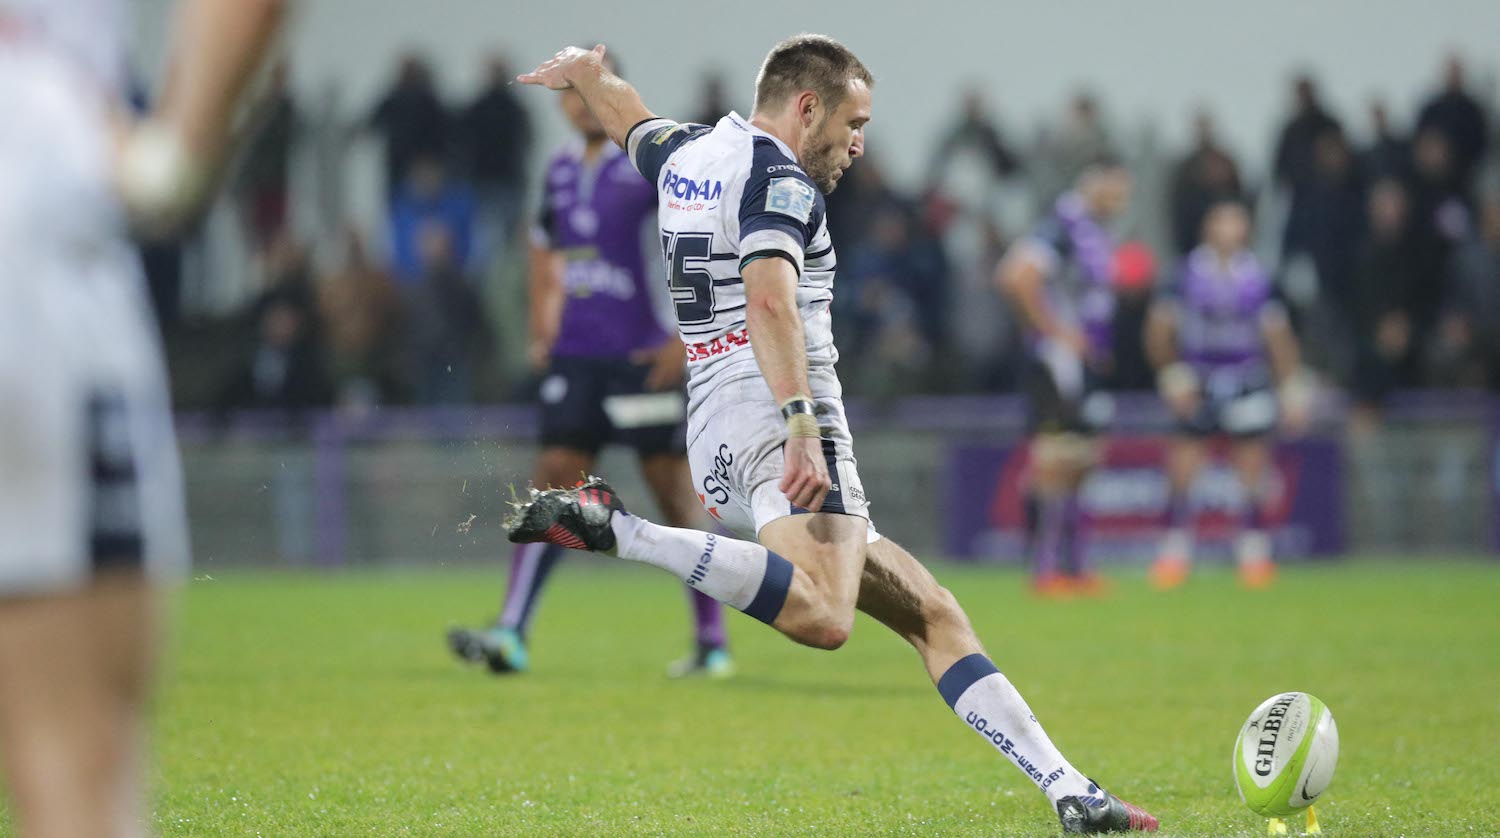 PRO D2 | COLOMIERS RUGBY - STADE MONTOIS : 29-16